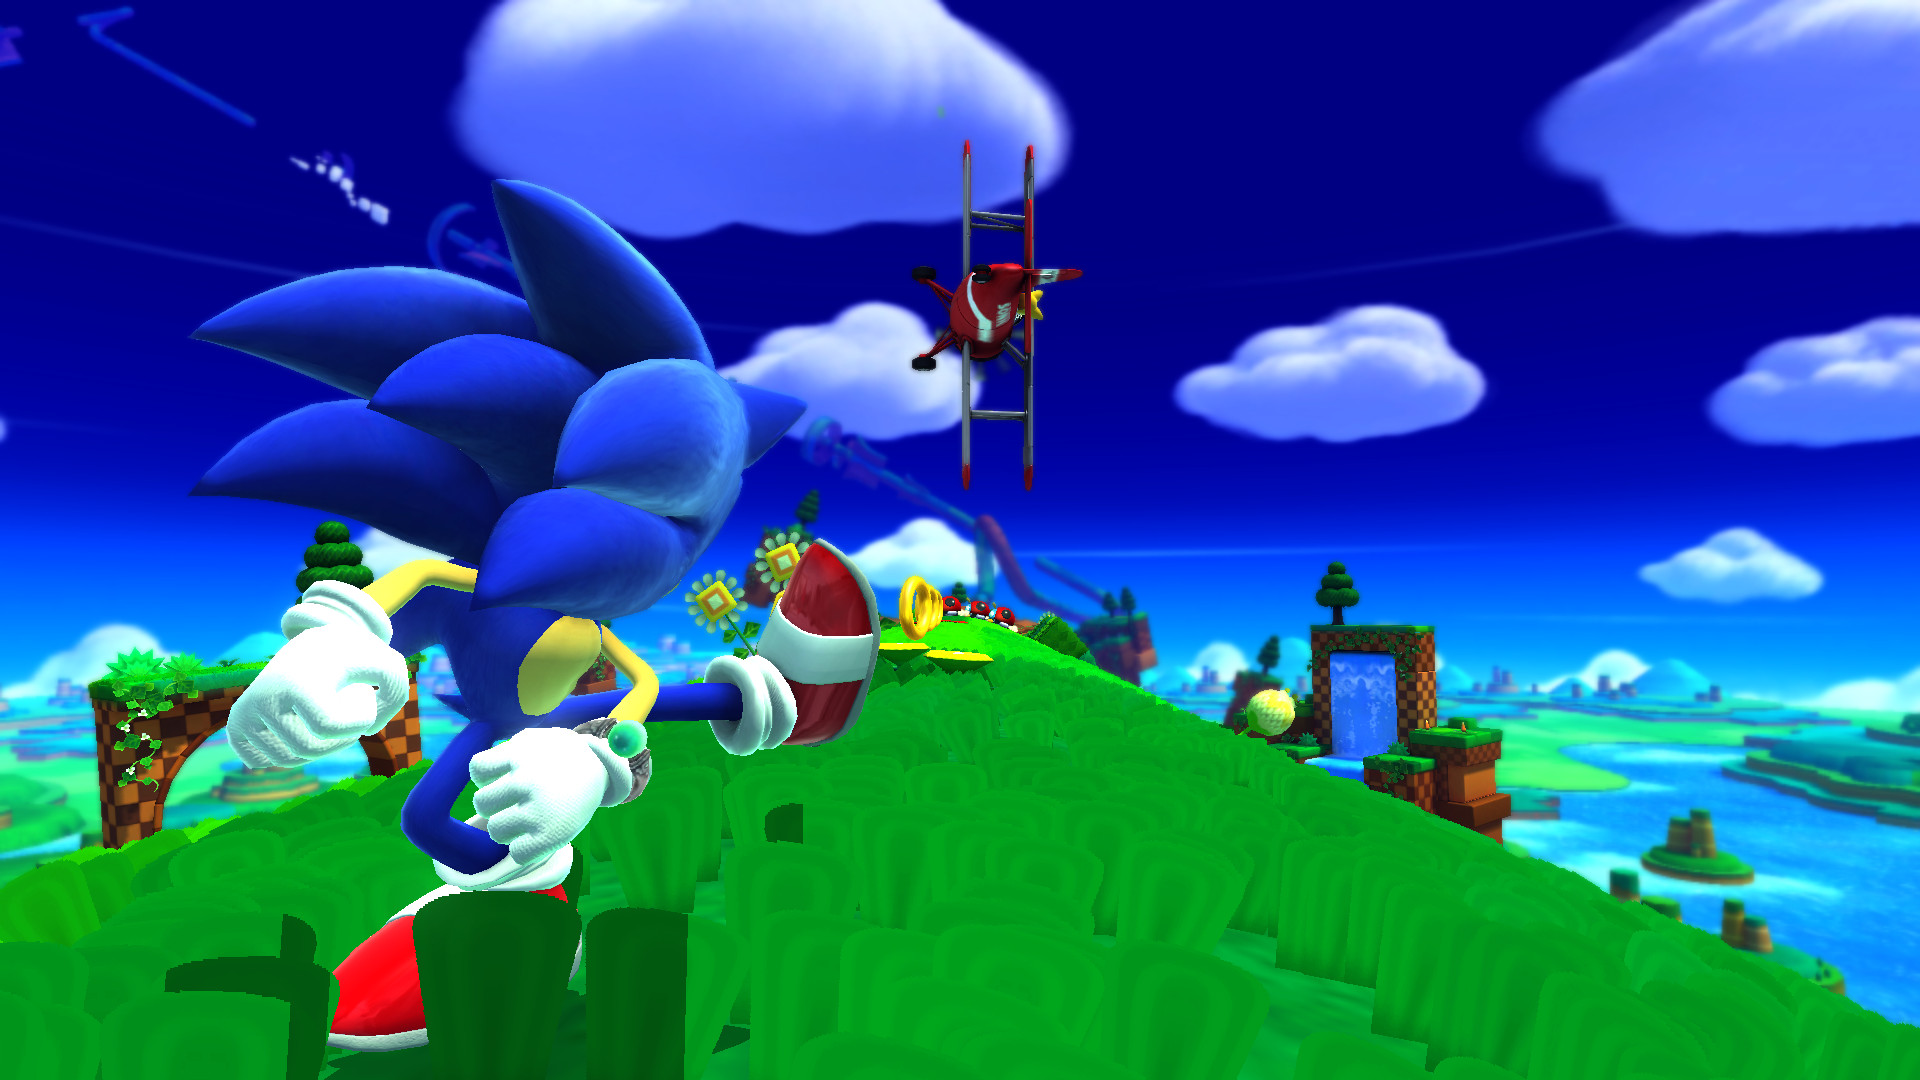 Let's Play: Sonic Lost World - Part 13 - Cloud Turtles and Pure Speed 